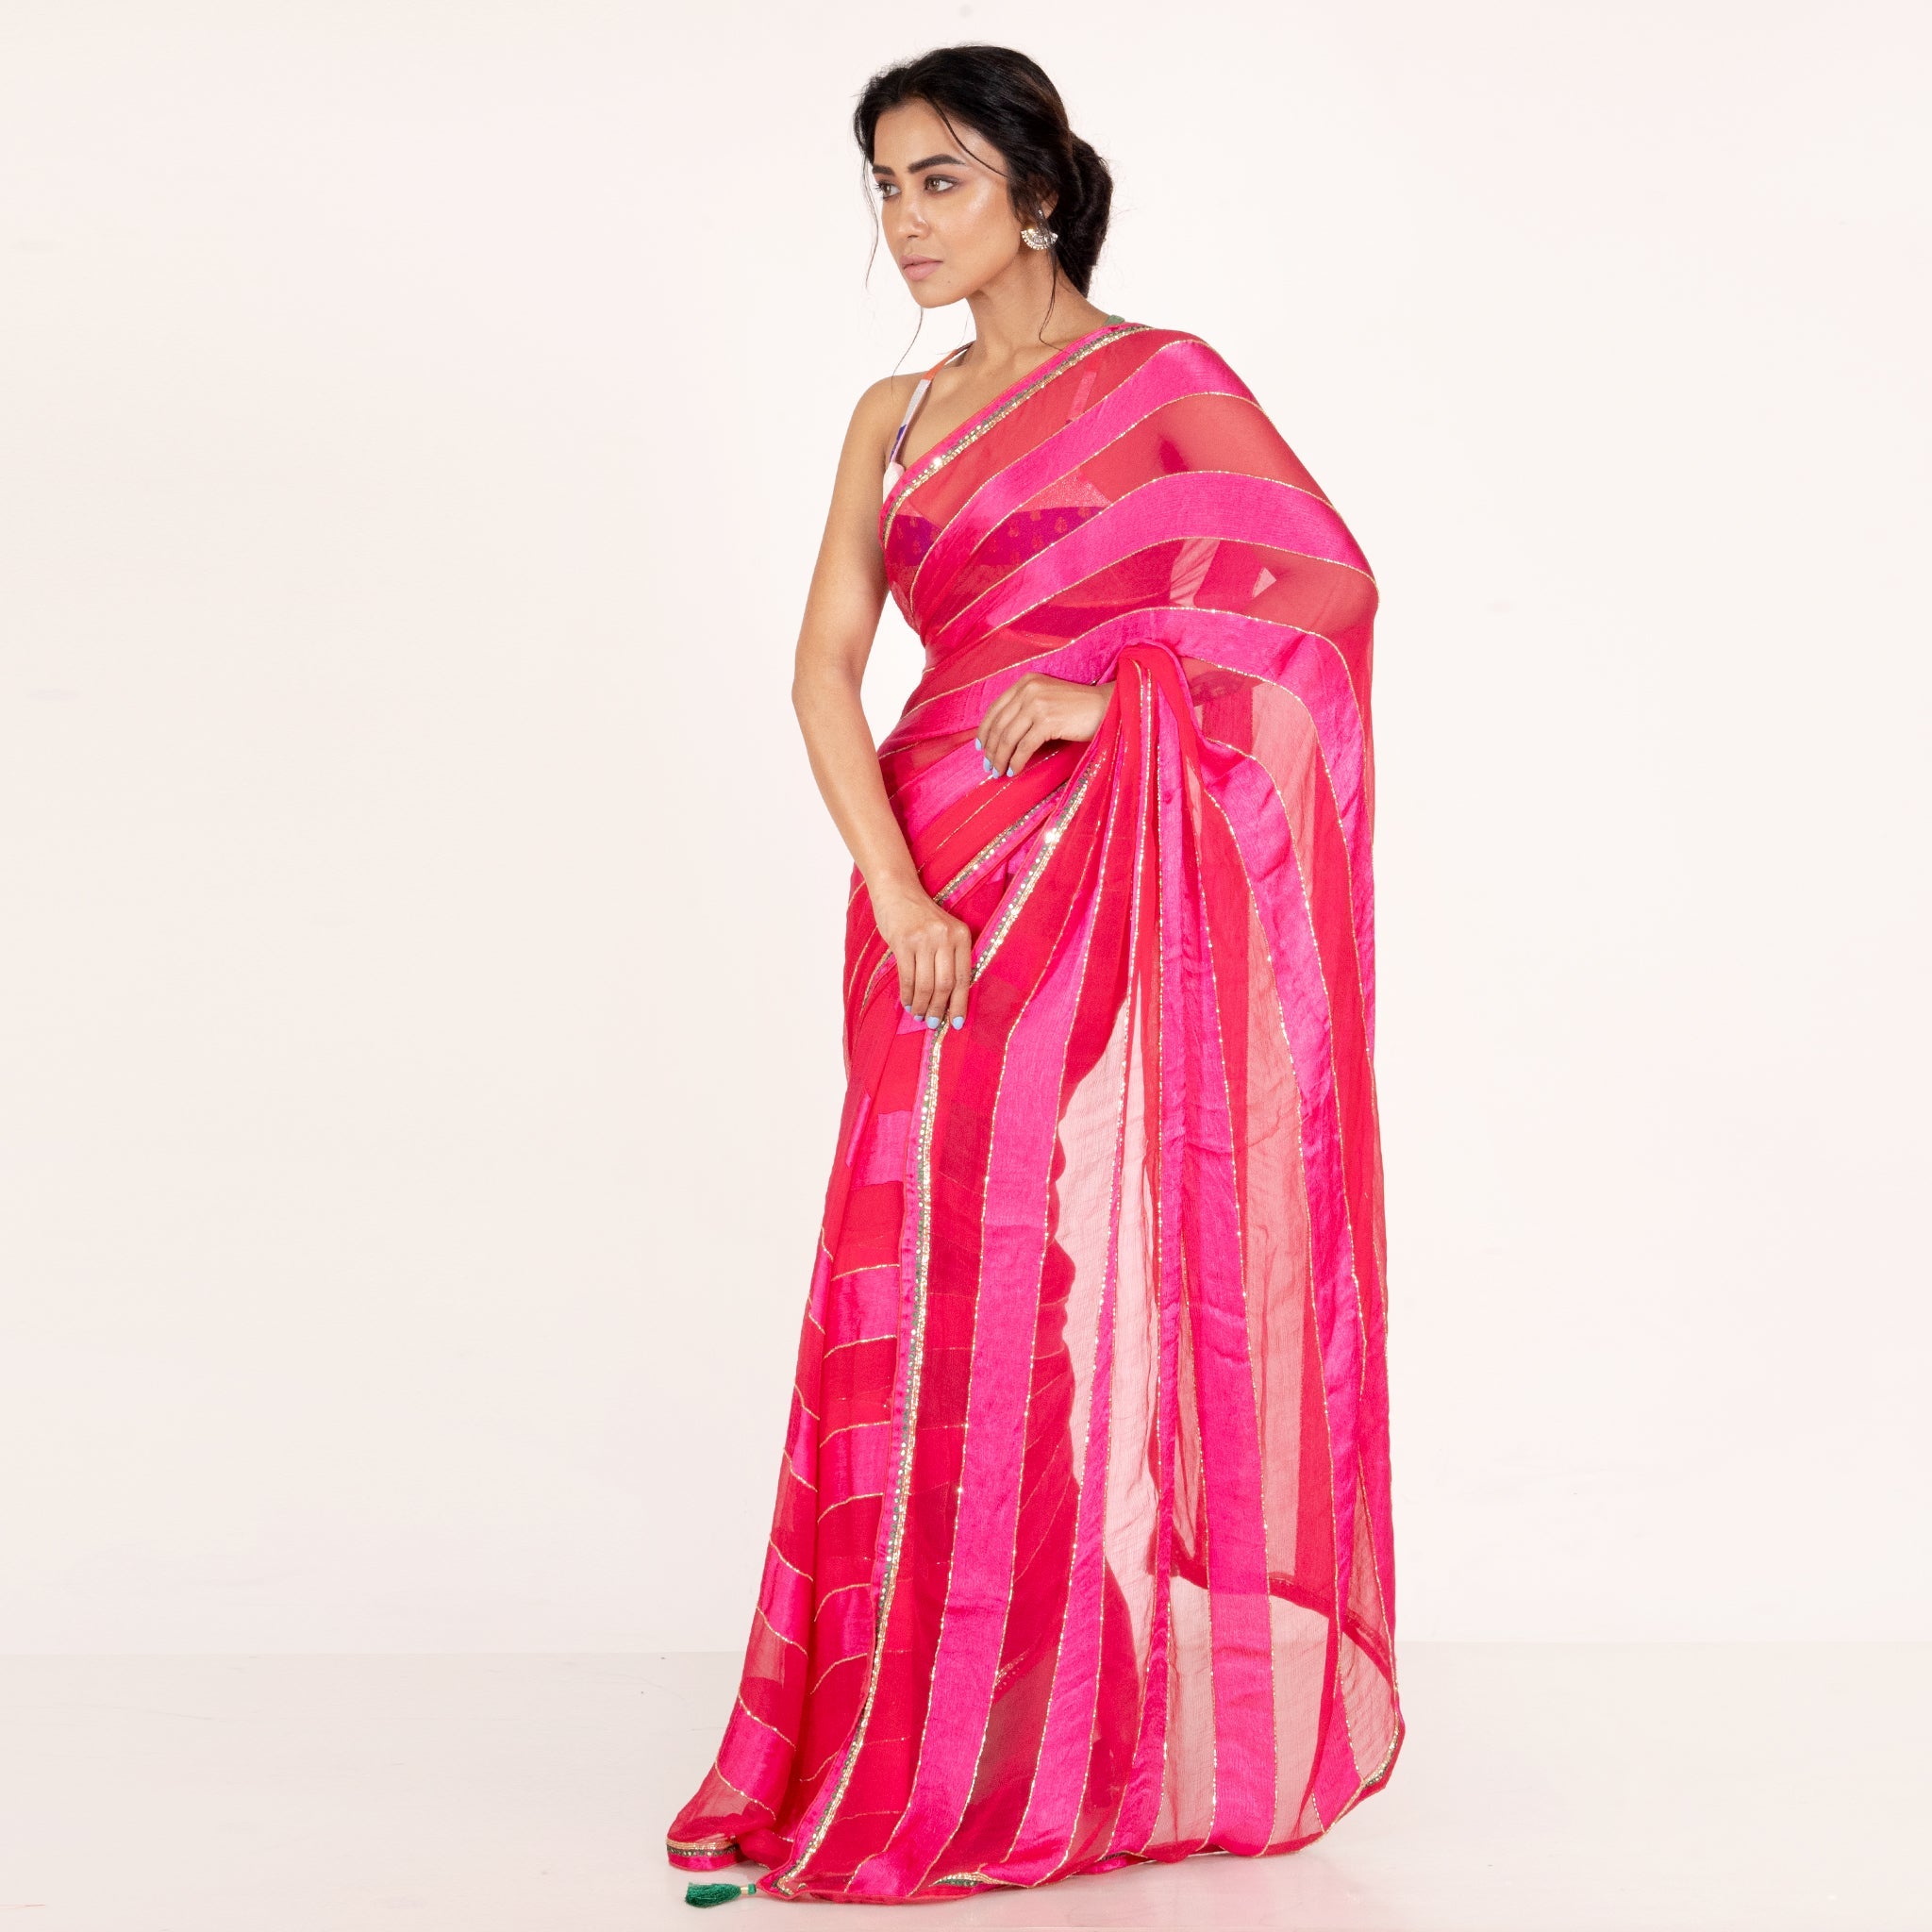 Women's Hot Pink Satin Chiffon Stripe Saree With Hand Embroidery - Boveee